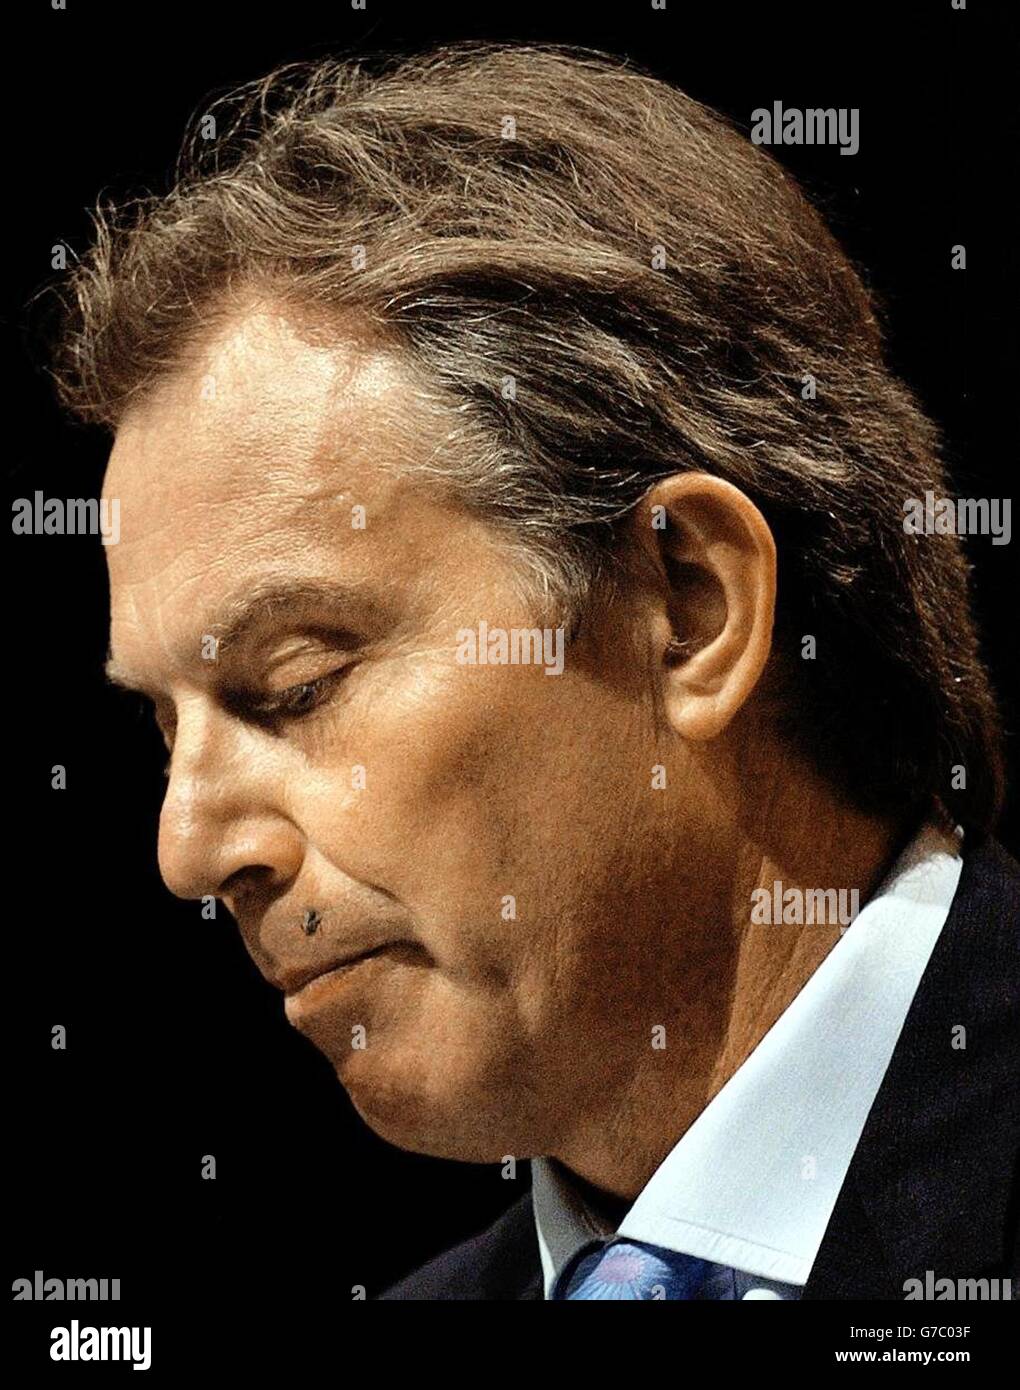 A fly lands on Britain's Prime Minister Tony Blair's lip during his speech to the TUC Conference in Brighton. The Government was today attacked for failing to repeal anti-union laws amid complaints that workers were still waiting for basic rights seven years after Labour came to power. Stock Photo